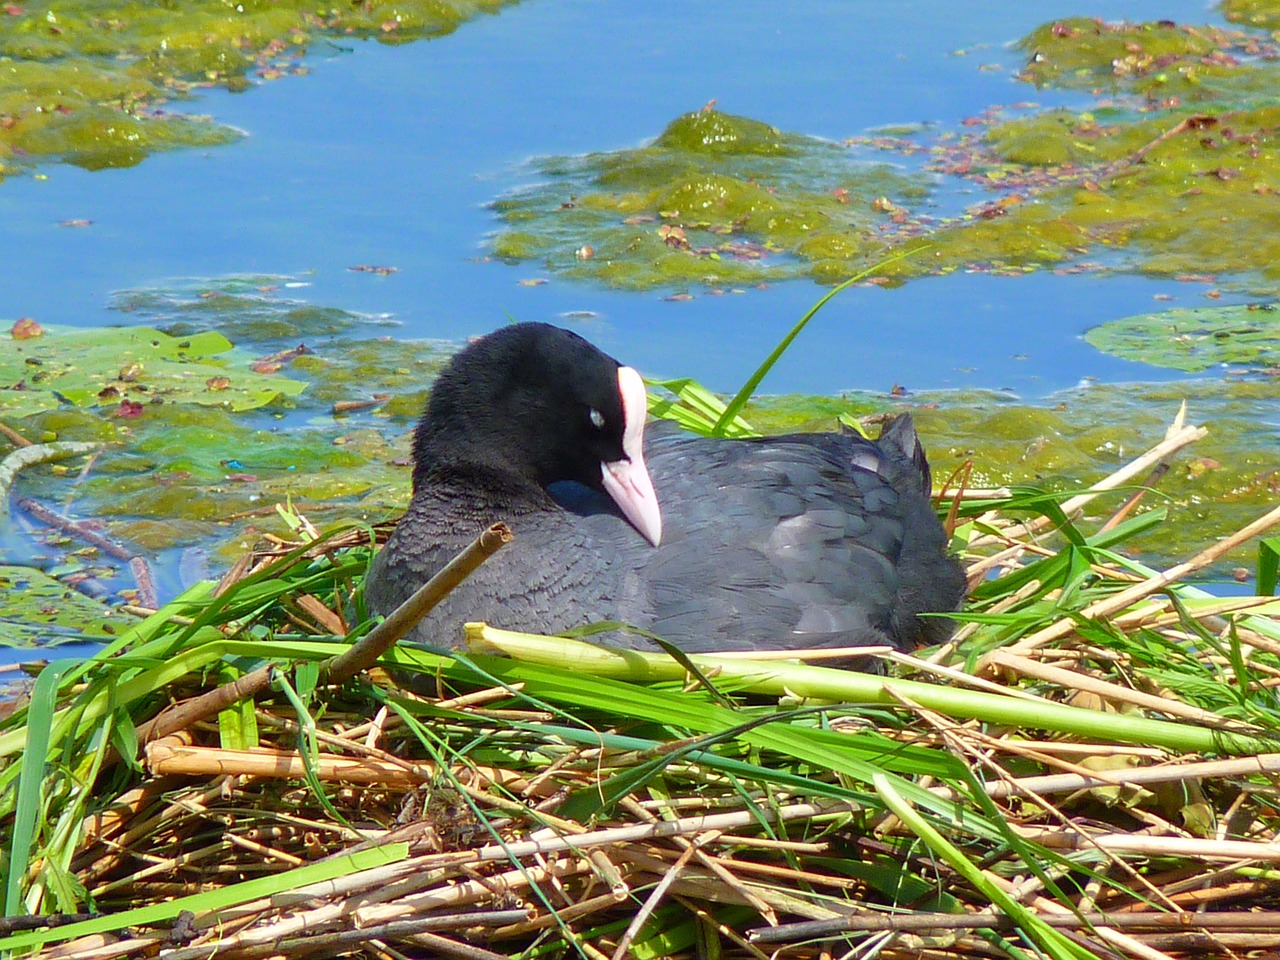 coot nest breed free photo